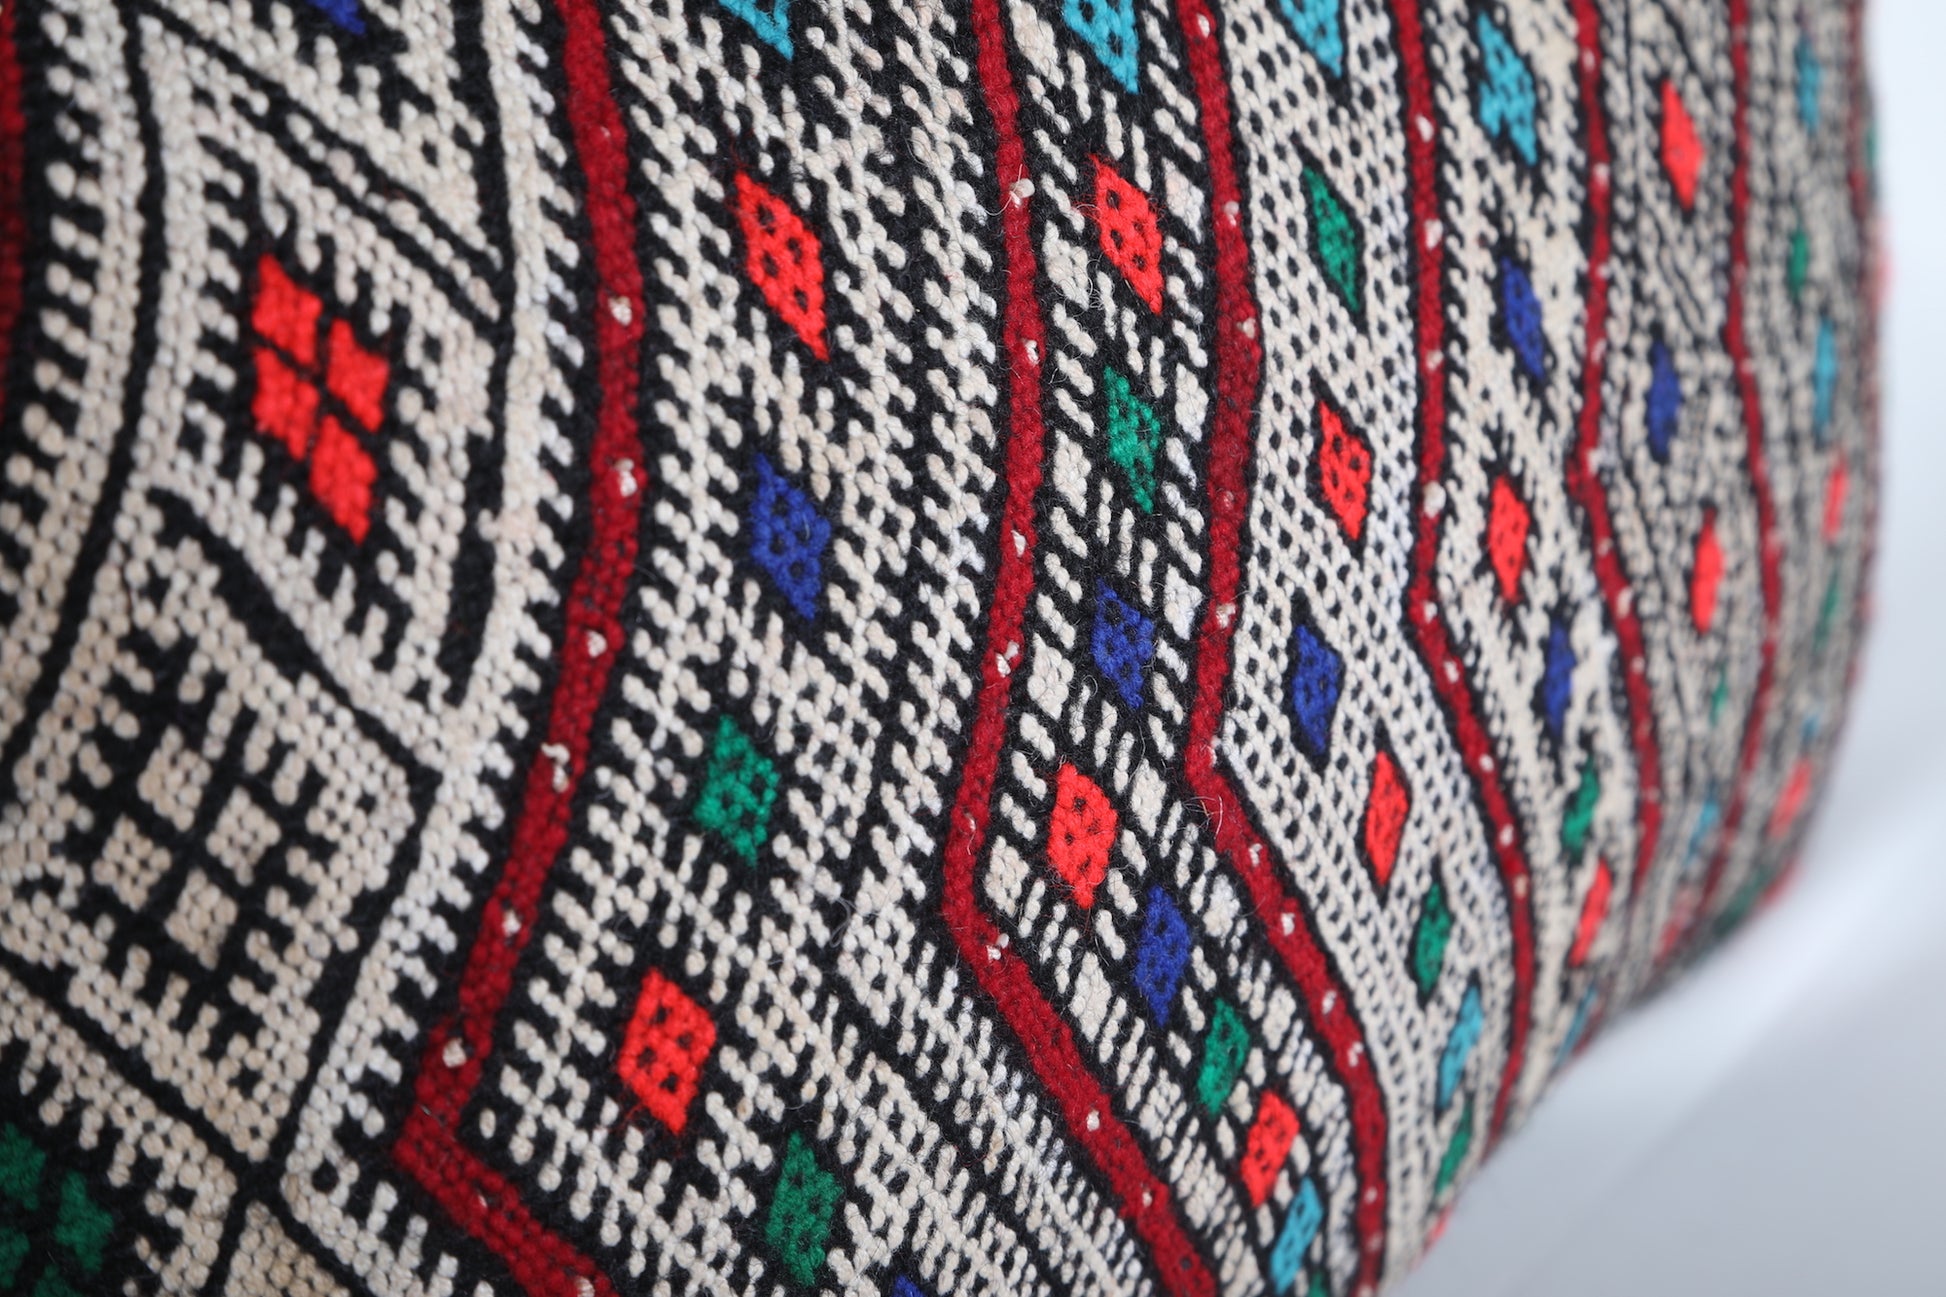 Moroccan pillow 16.9 INCHES X 22.8 INCHES